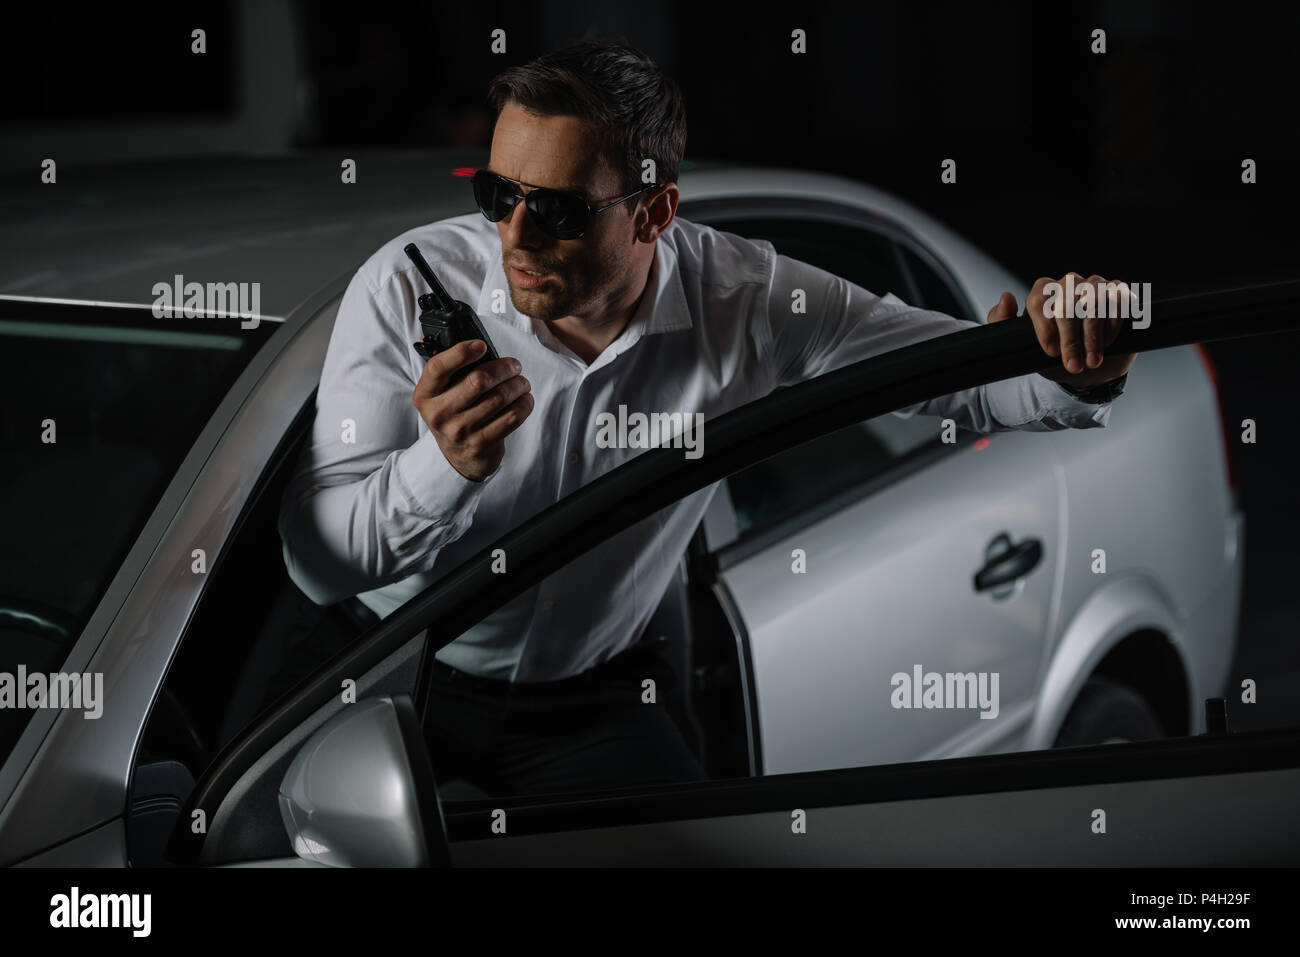 https://c8.alamy.com/comp/P4H29F/serious-male-undercover-agent-in-sunglasses-using-talkie-walkie-near-car-P4H29F.jpg